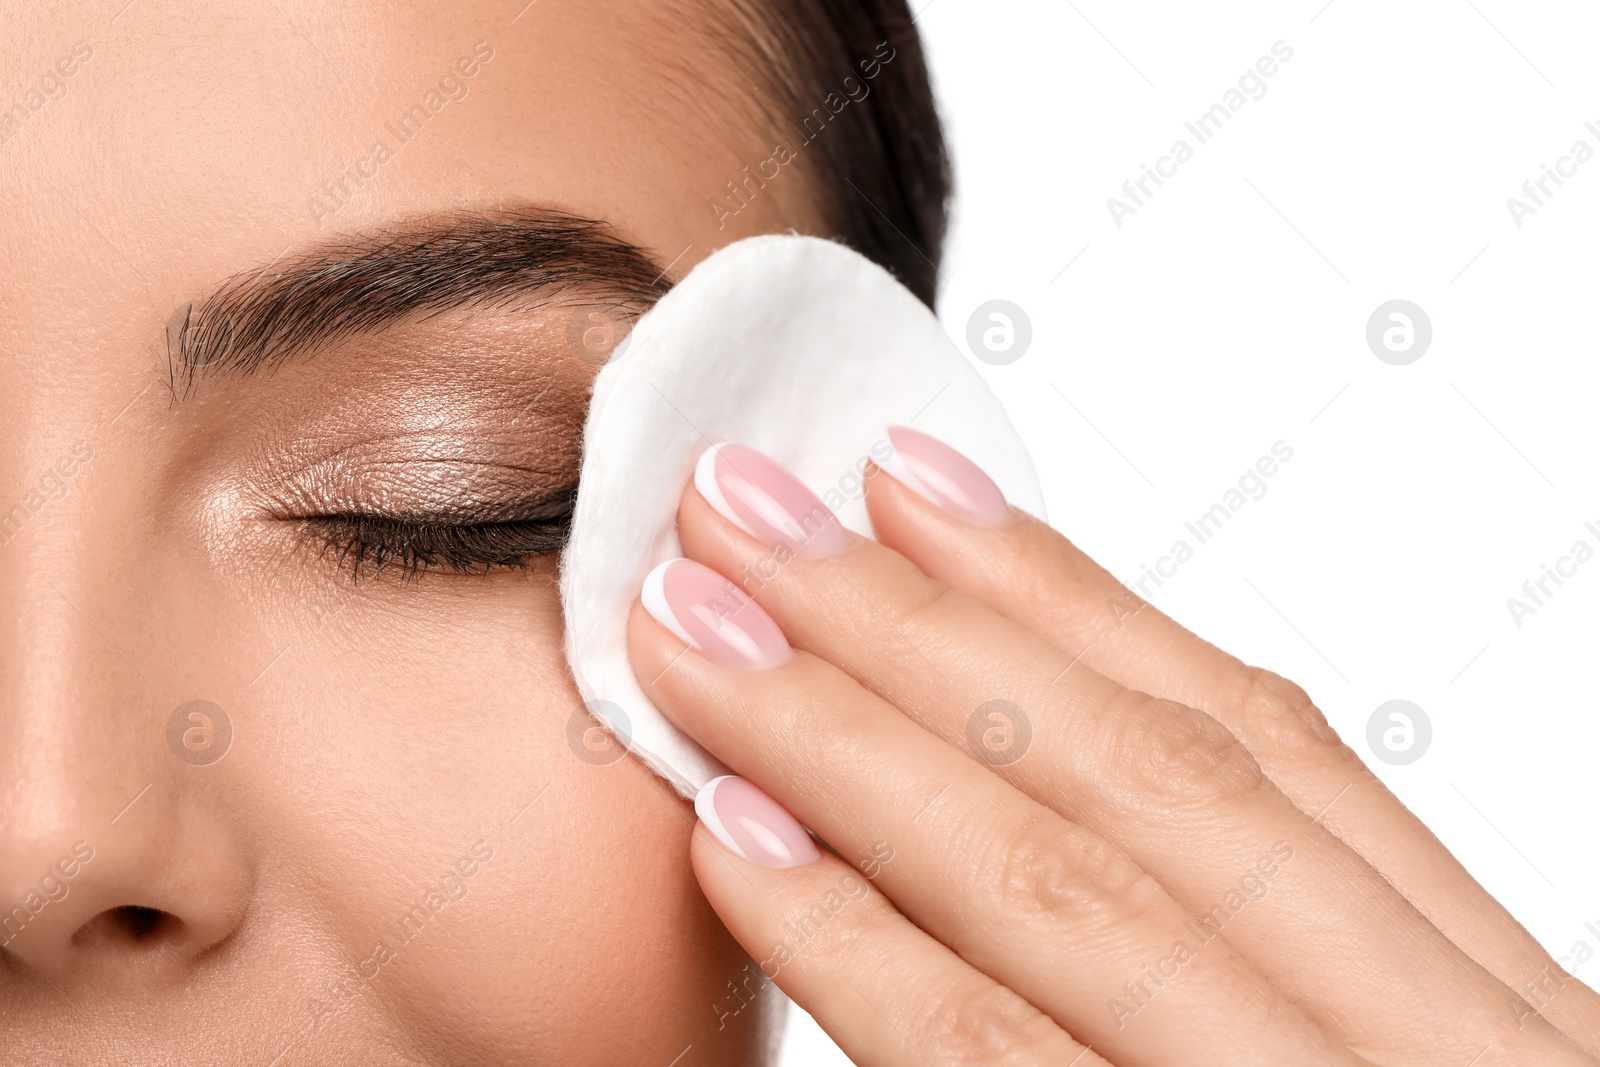 Photo of Beautiful woman removing makeup with cotton pad on white background, closeup